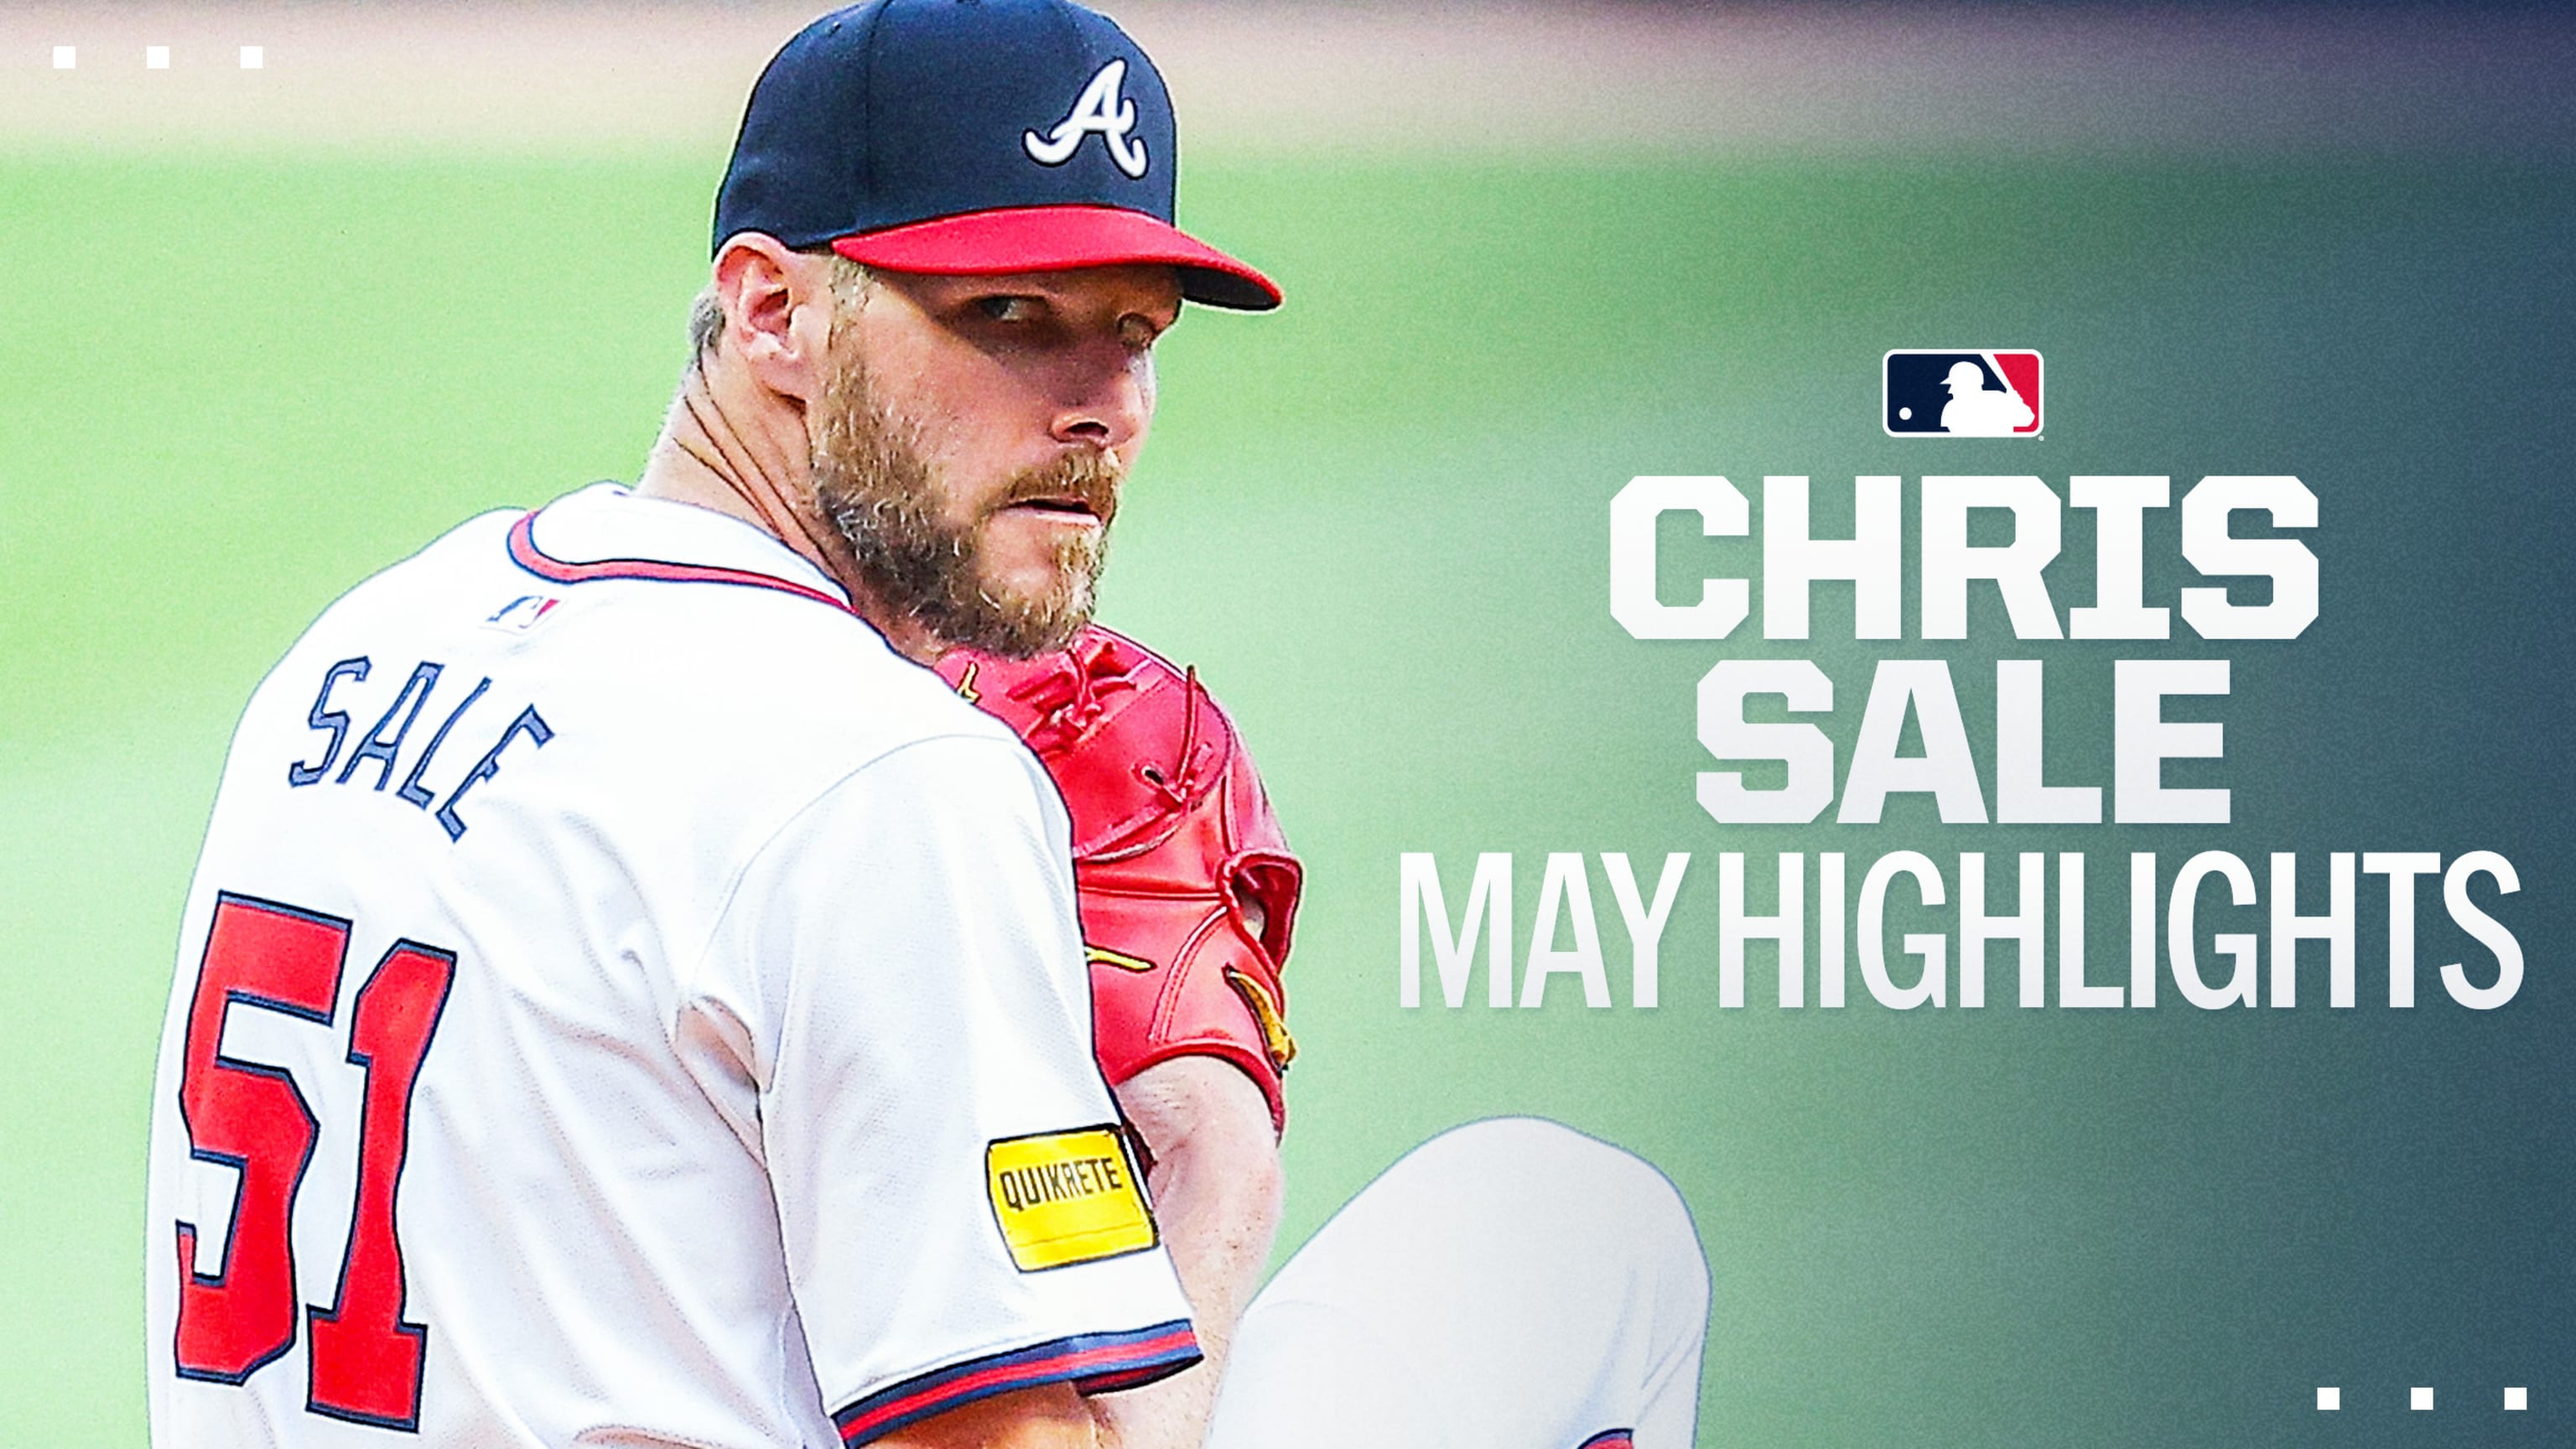 Chris Sale's best highlights from May